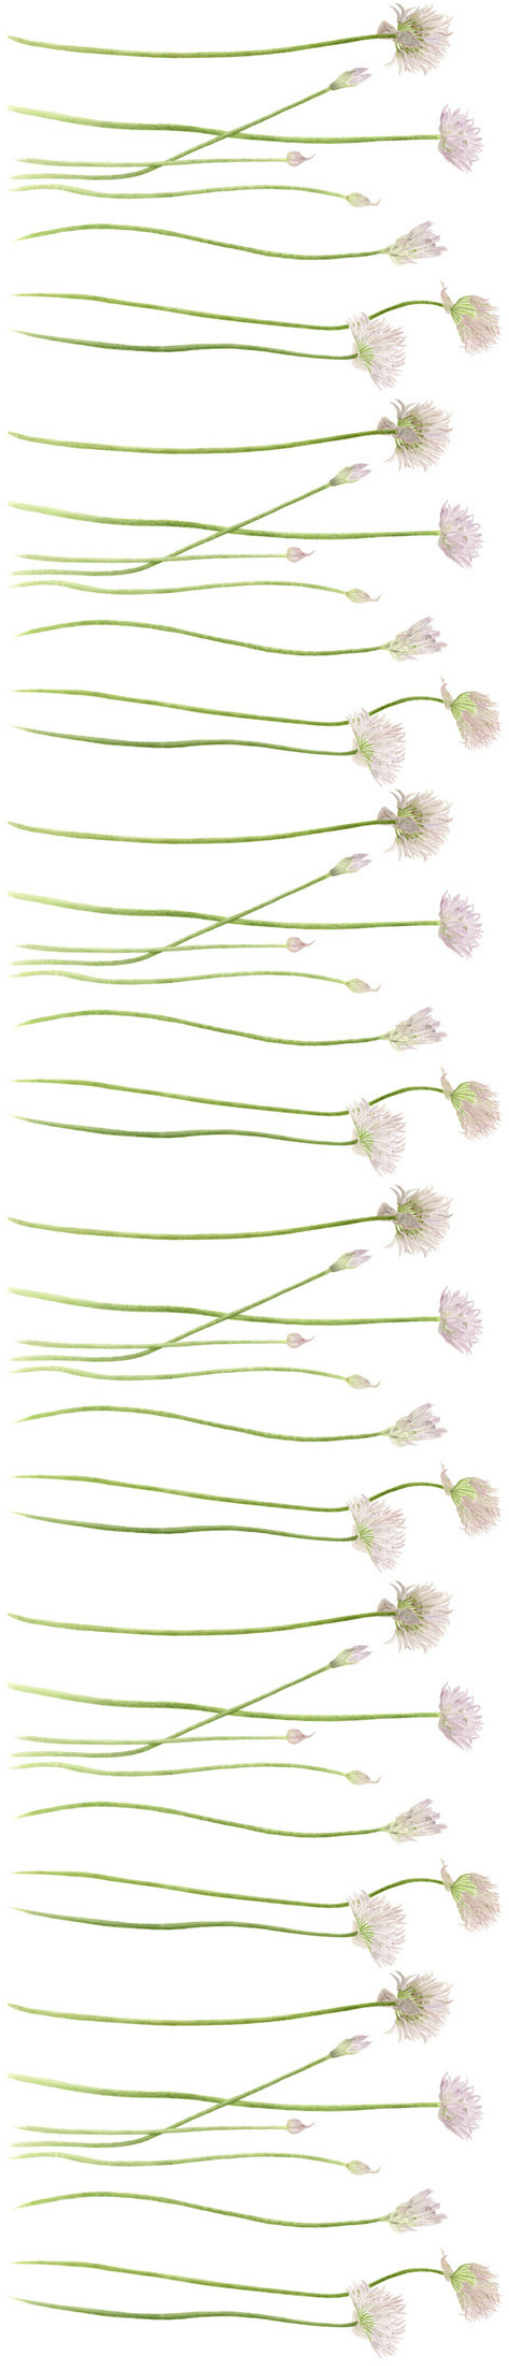 Chives, Botanical art. Watercolor. Painting. Limited Edition prints. Commissions.